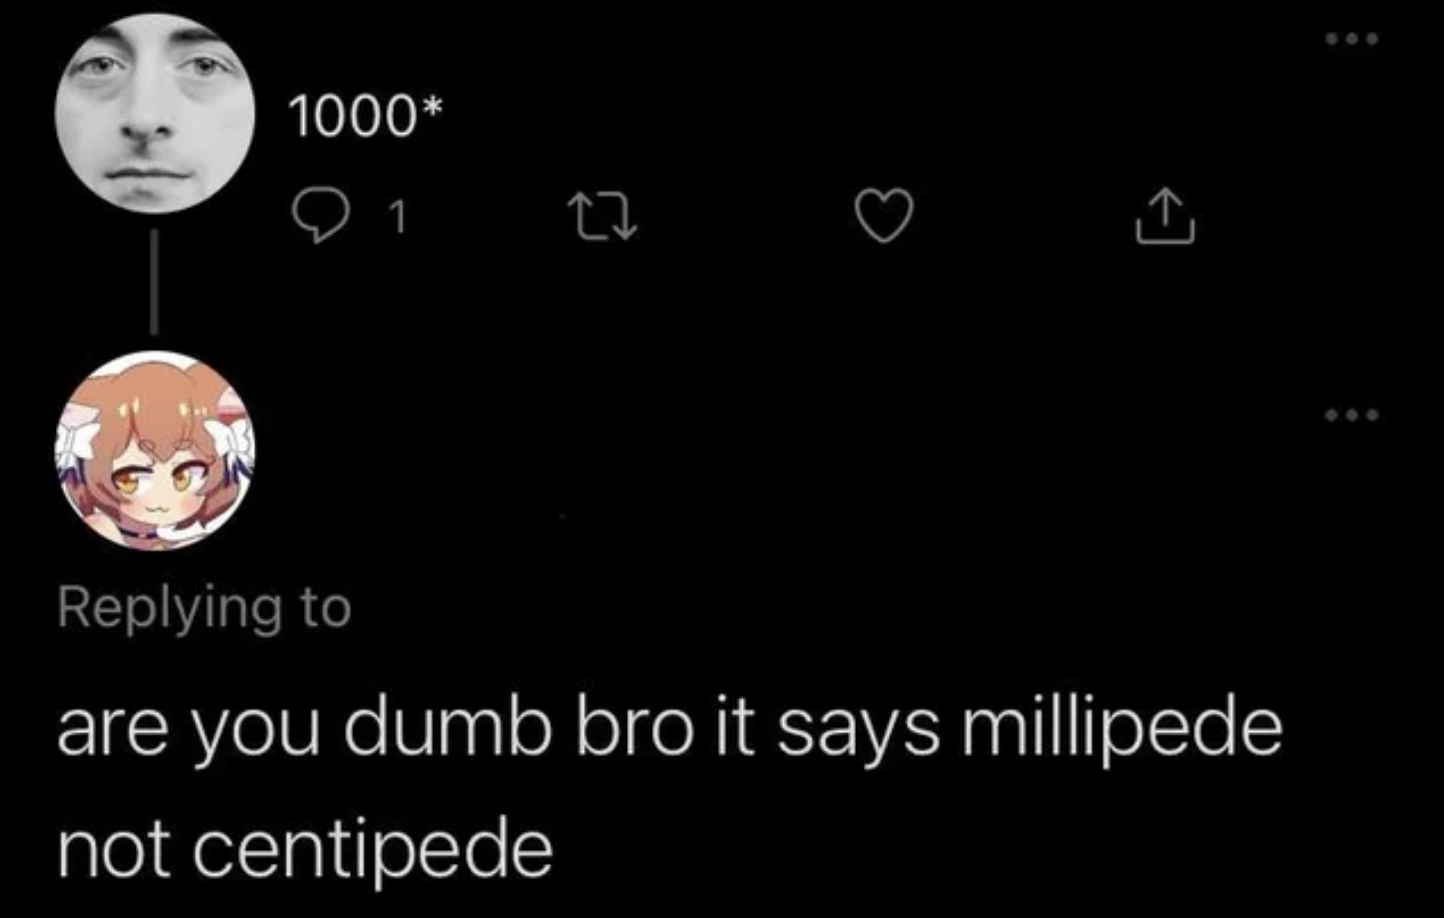 Confidently incorrect - are you dumb bro it says millipede not centipede